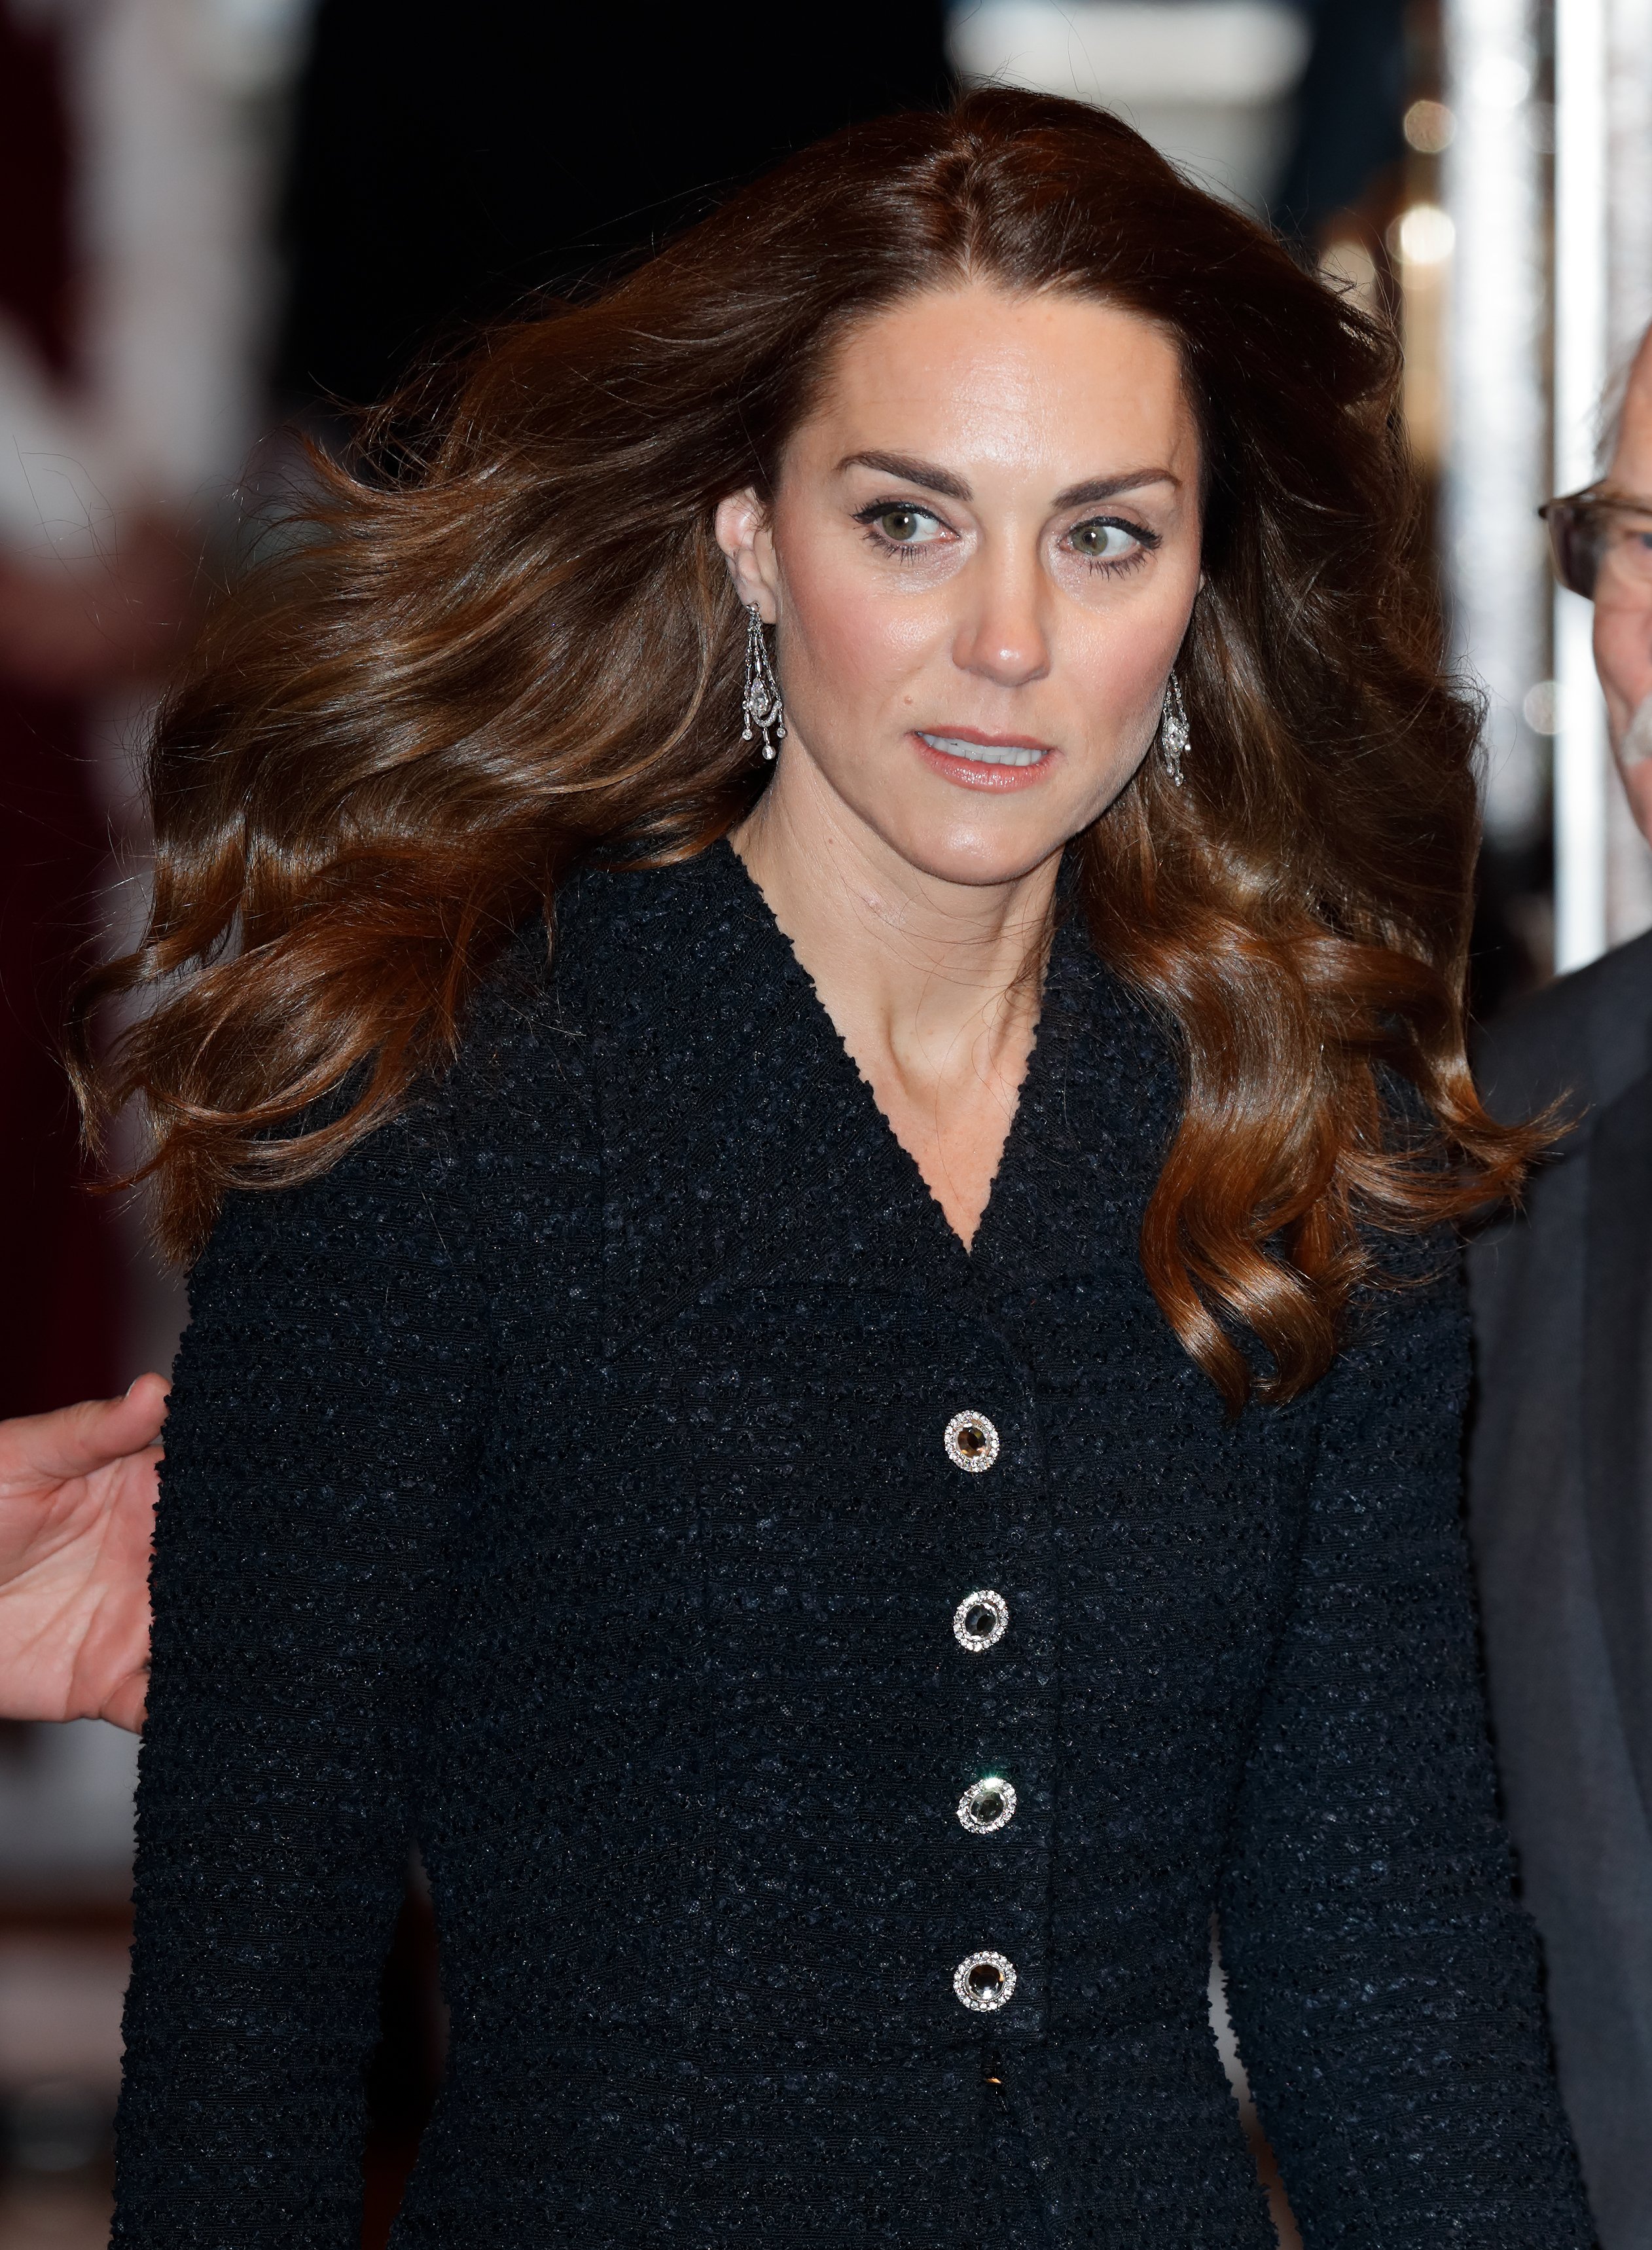 Duchess of Cambridge, Kate Middleton at the Noel Coward Theatre on February 25 2020 | Source: Getty Images